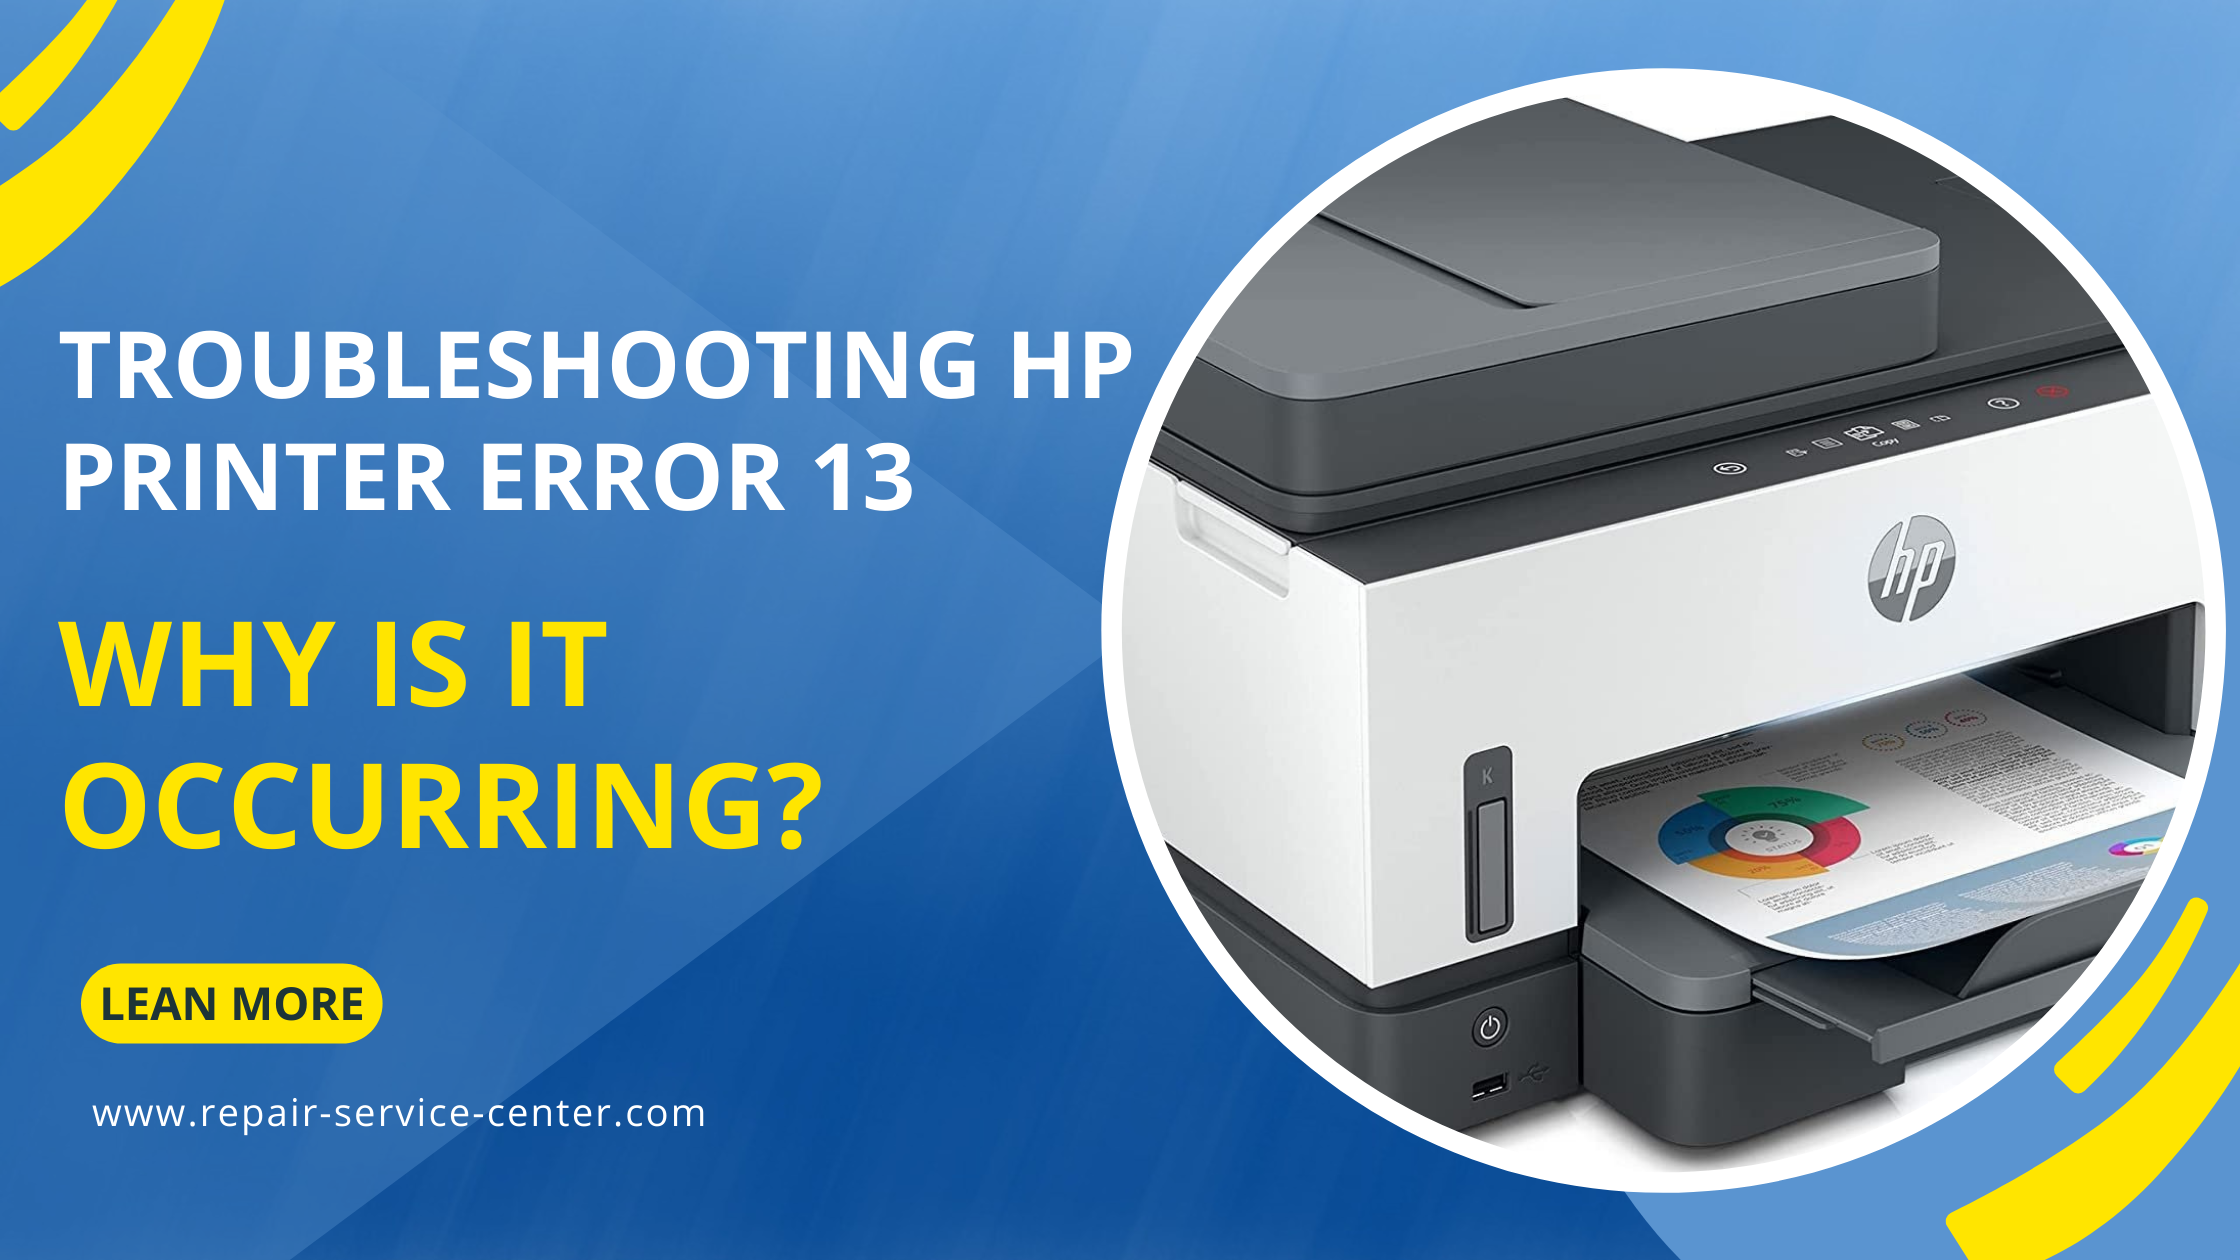 TROUBLESHOOTING HP PRINTER ERROR 13: WHY IS IT OCCURRING?